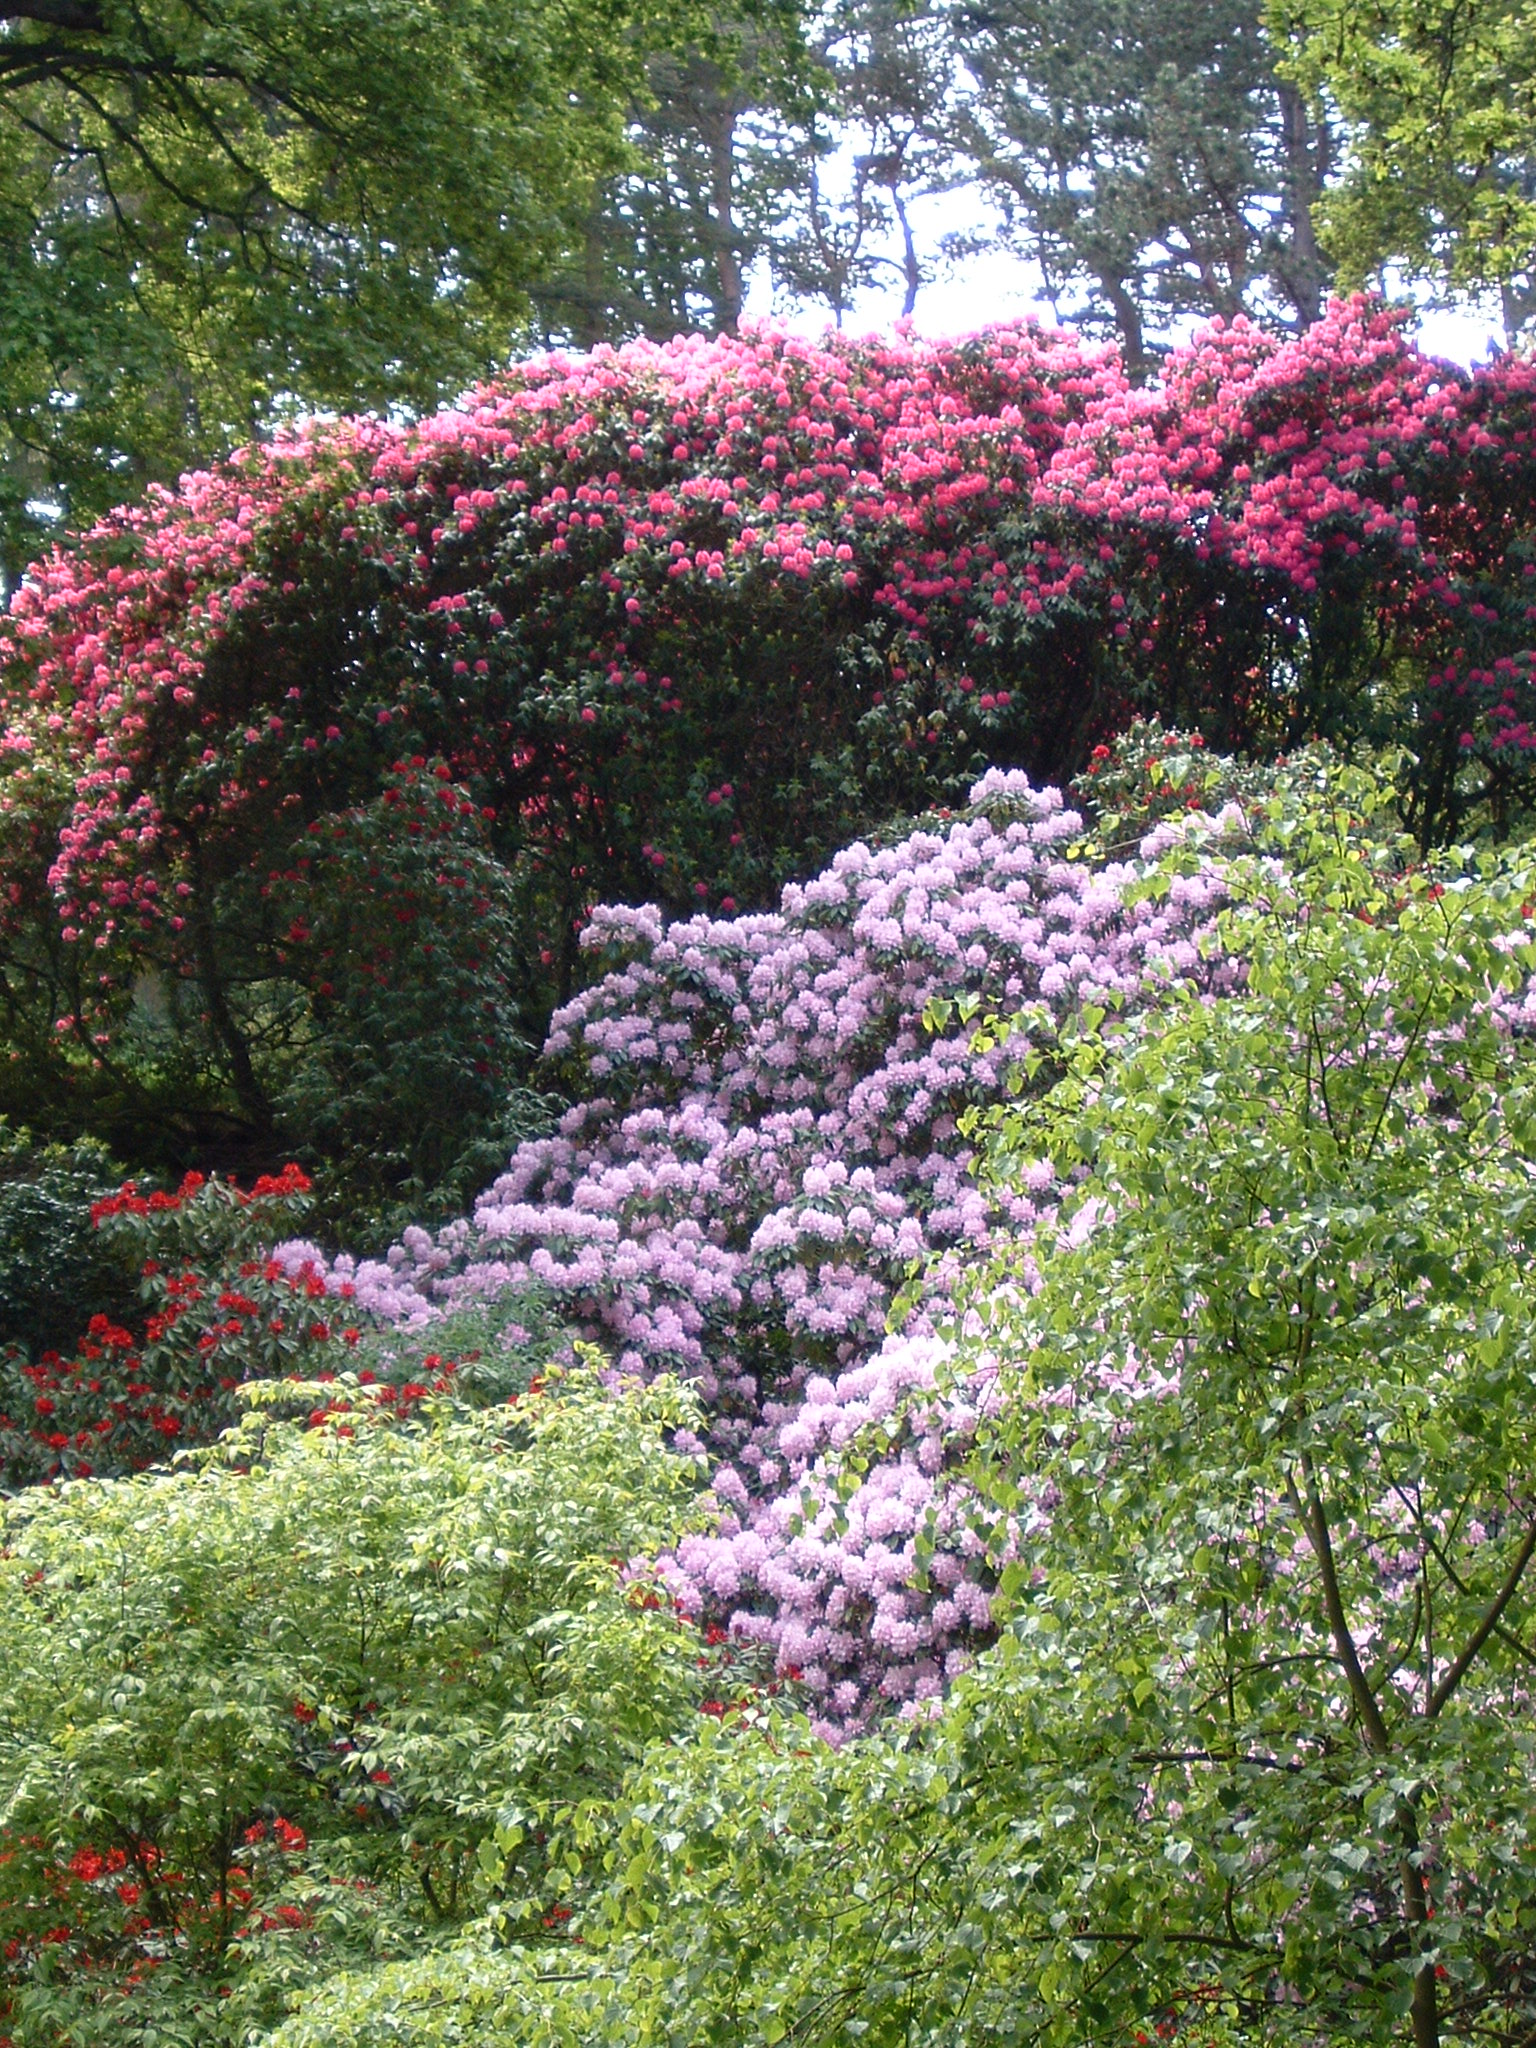 some trees are covered in flowers and bushes